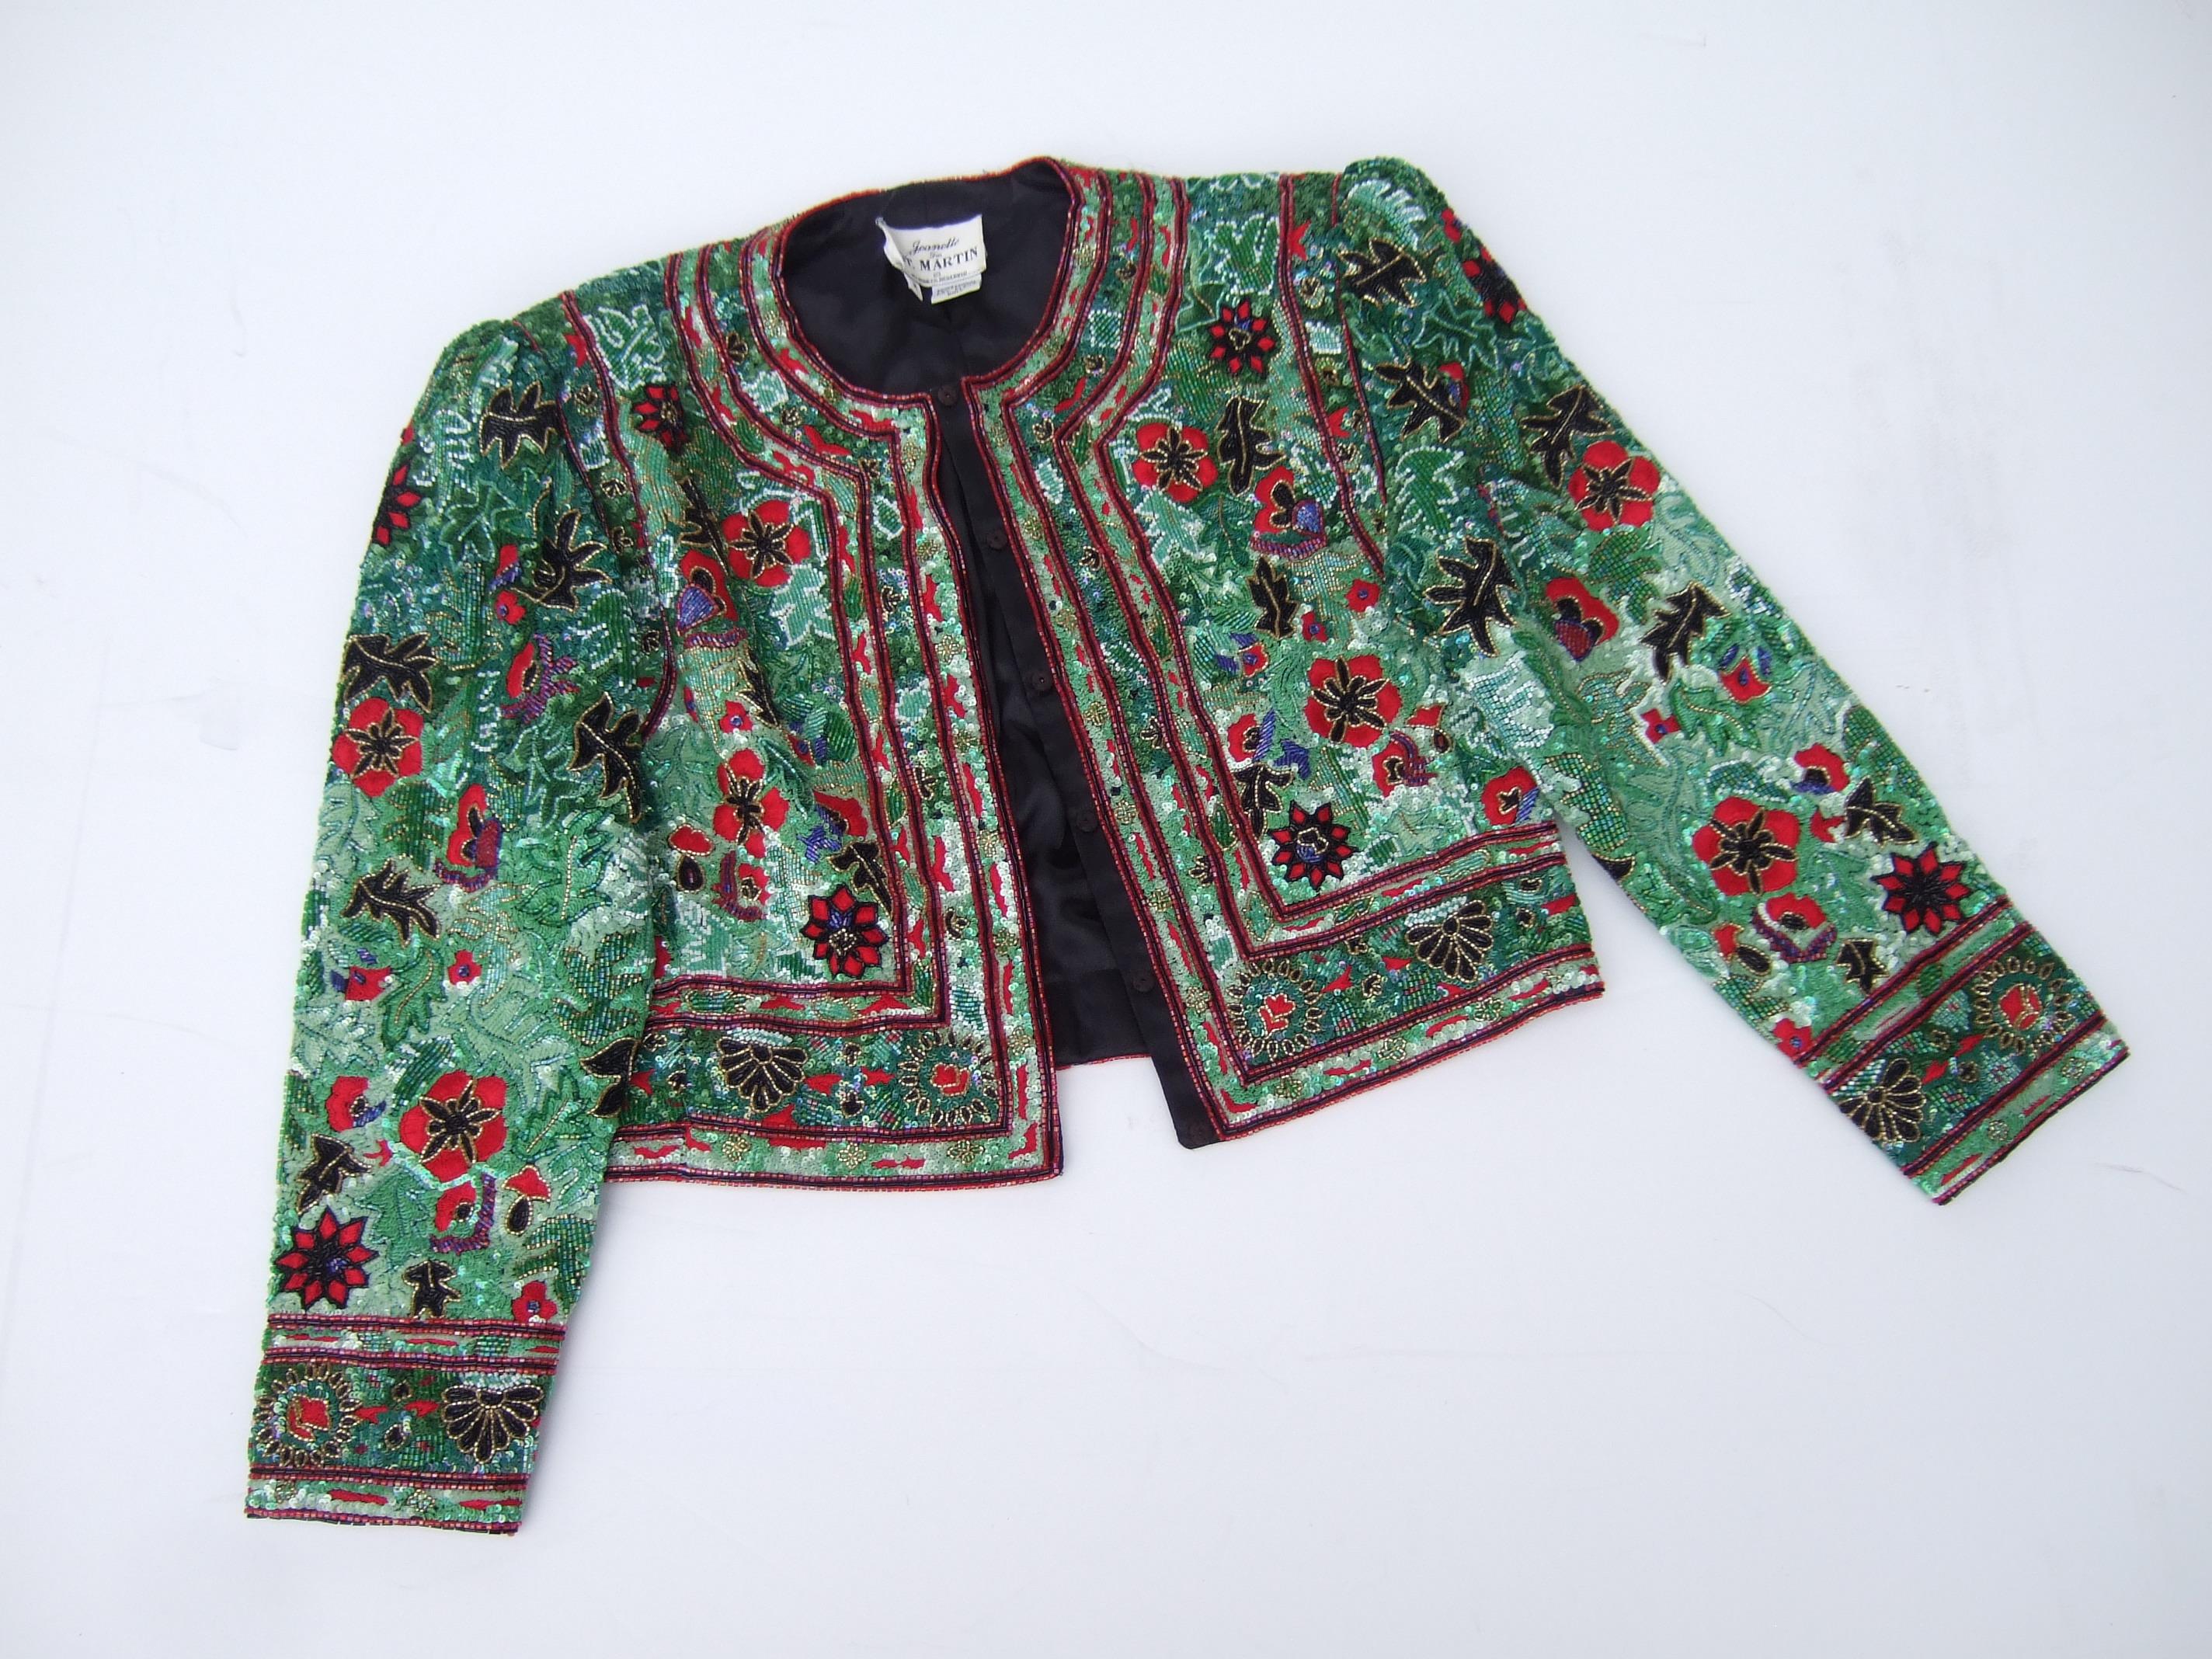 Exquisite Elaborate Glass Floral Beaded Embroidered Bolero Jacket c 1980s For Sale 5